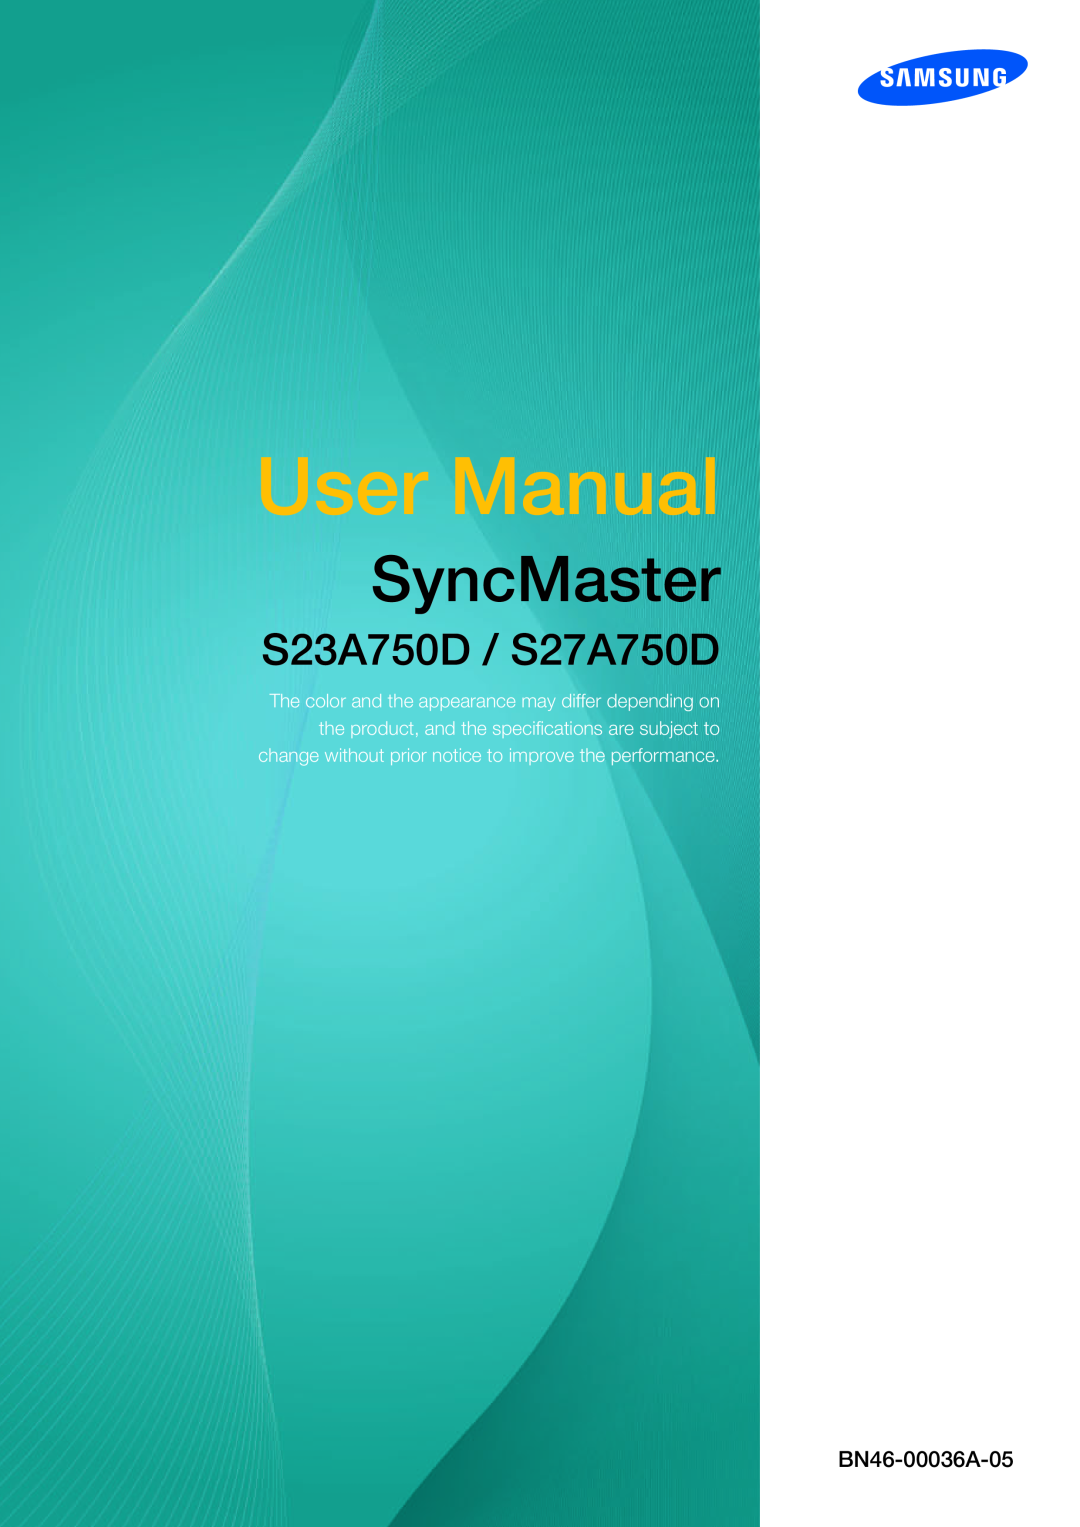 Samsung user manual User Manual, SyncMaster, S23A750D / S27A750D, BN46-00036A-05 